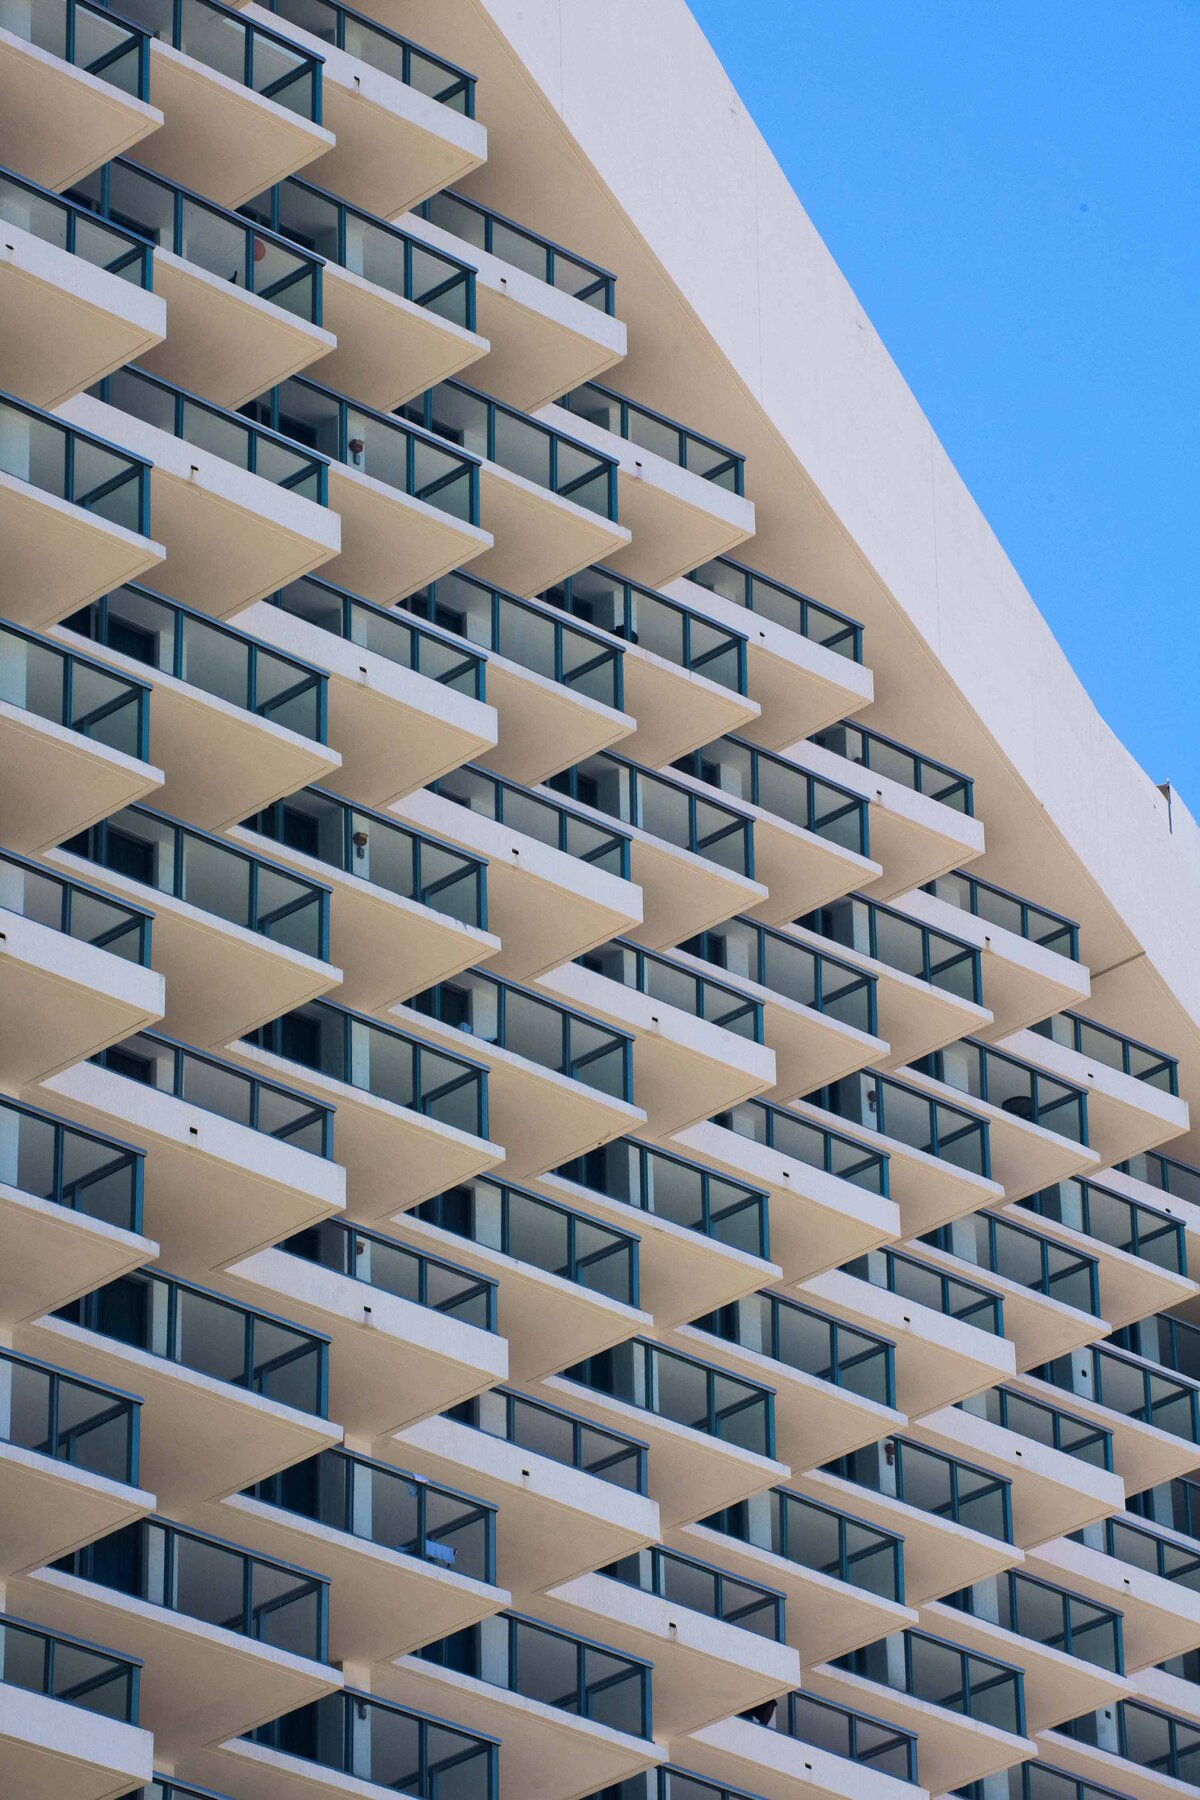 Balconies are shot showing geometric repetition in an artistic portrayal of the accommodations for guests